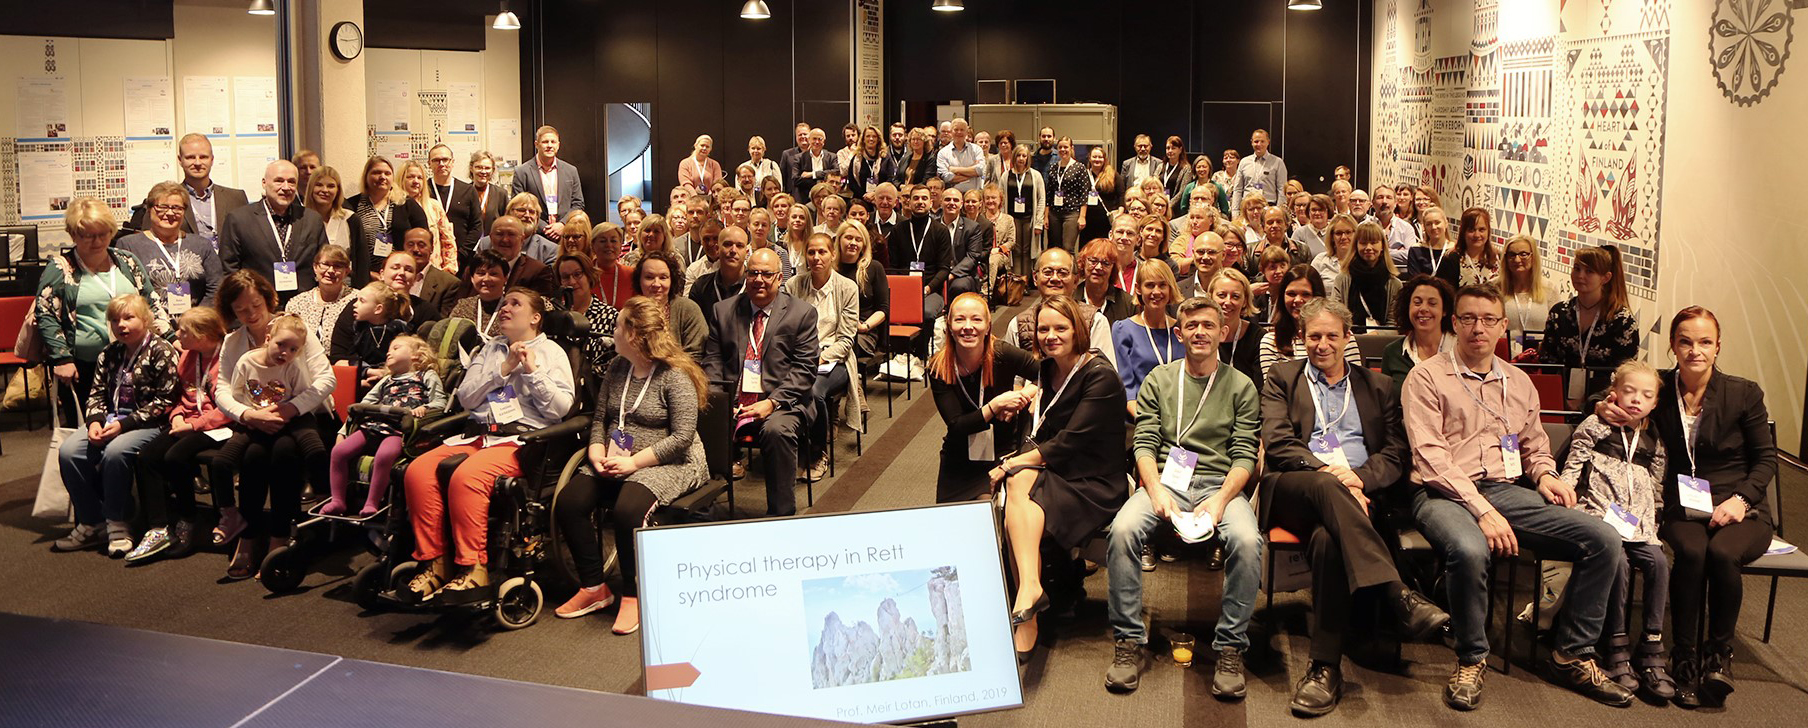 6th European Rett Syndrome Conference, Tampere Finland